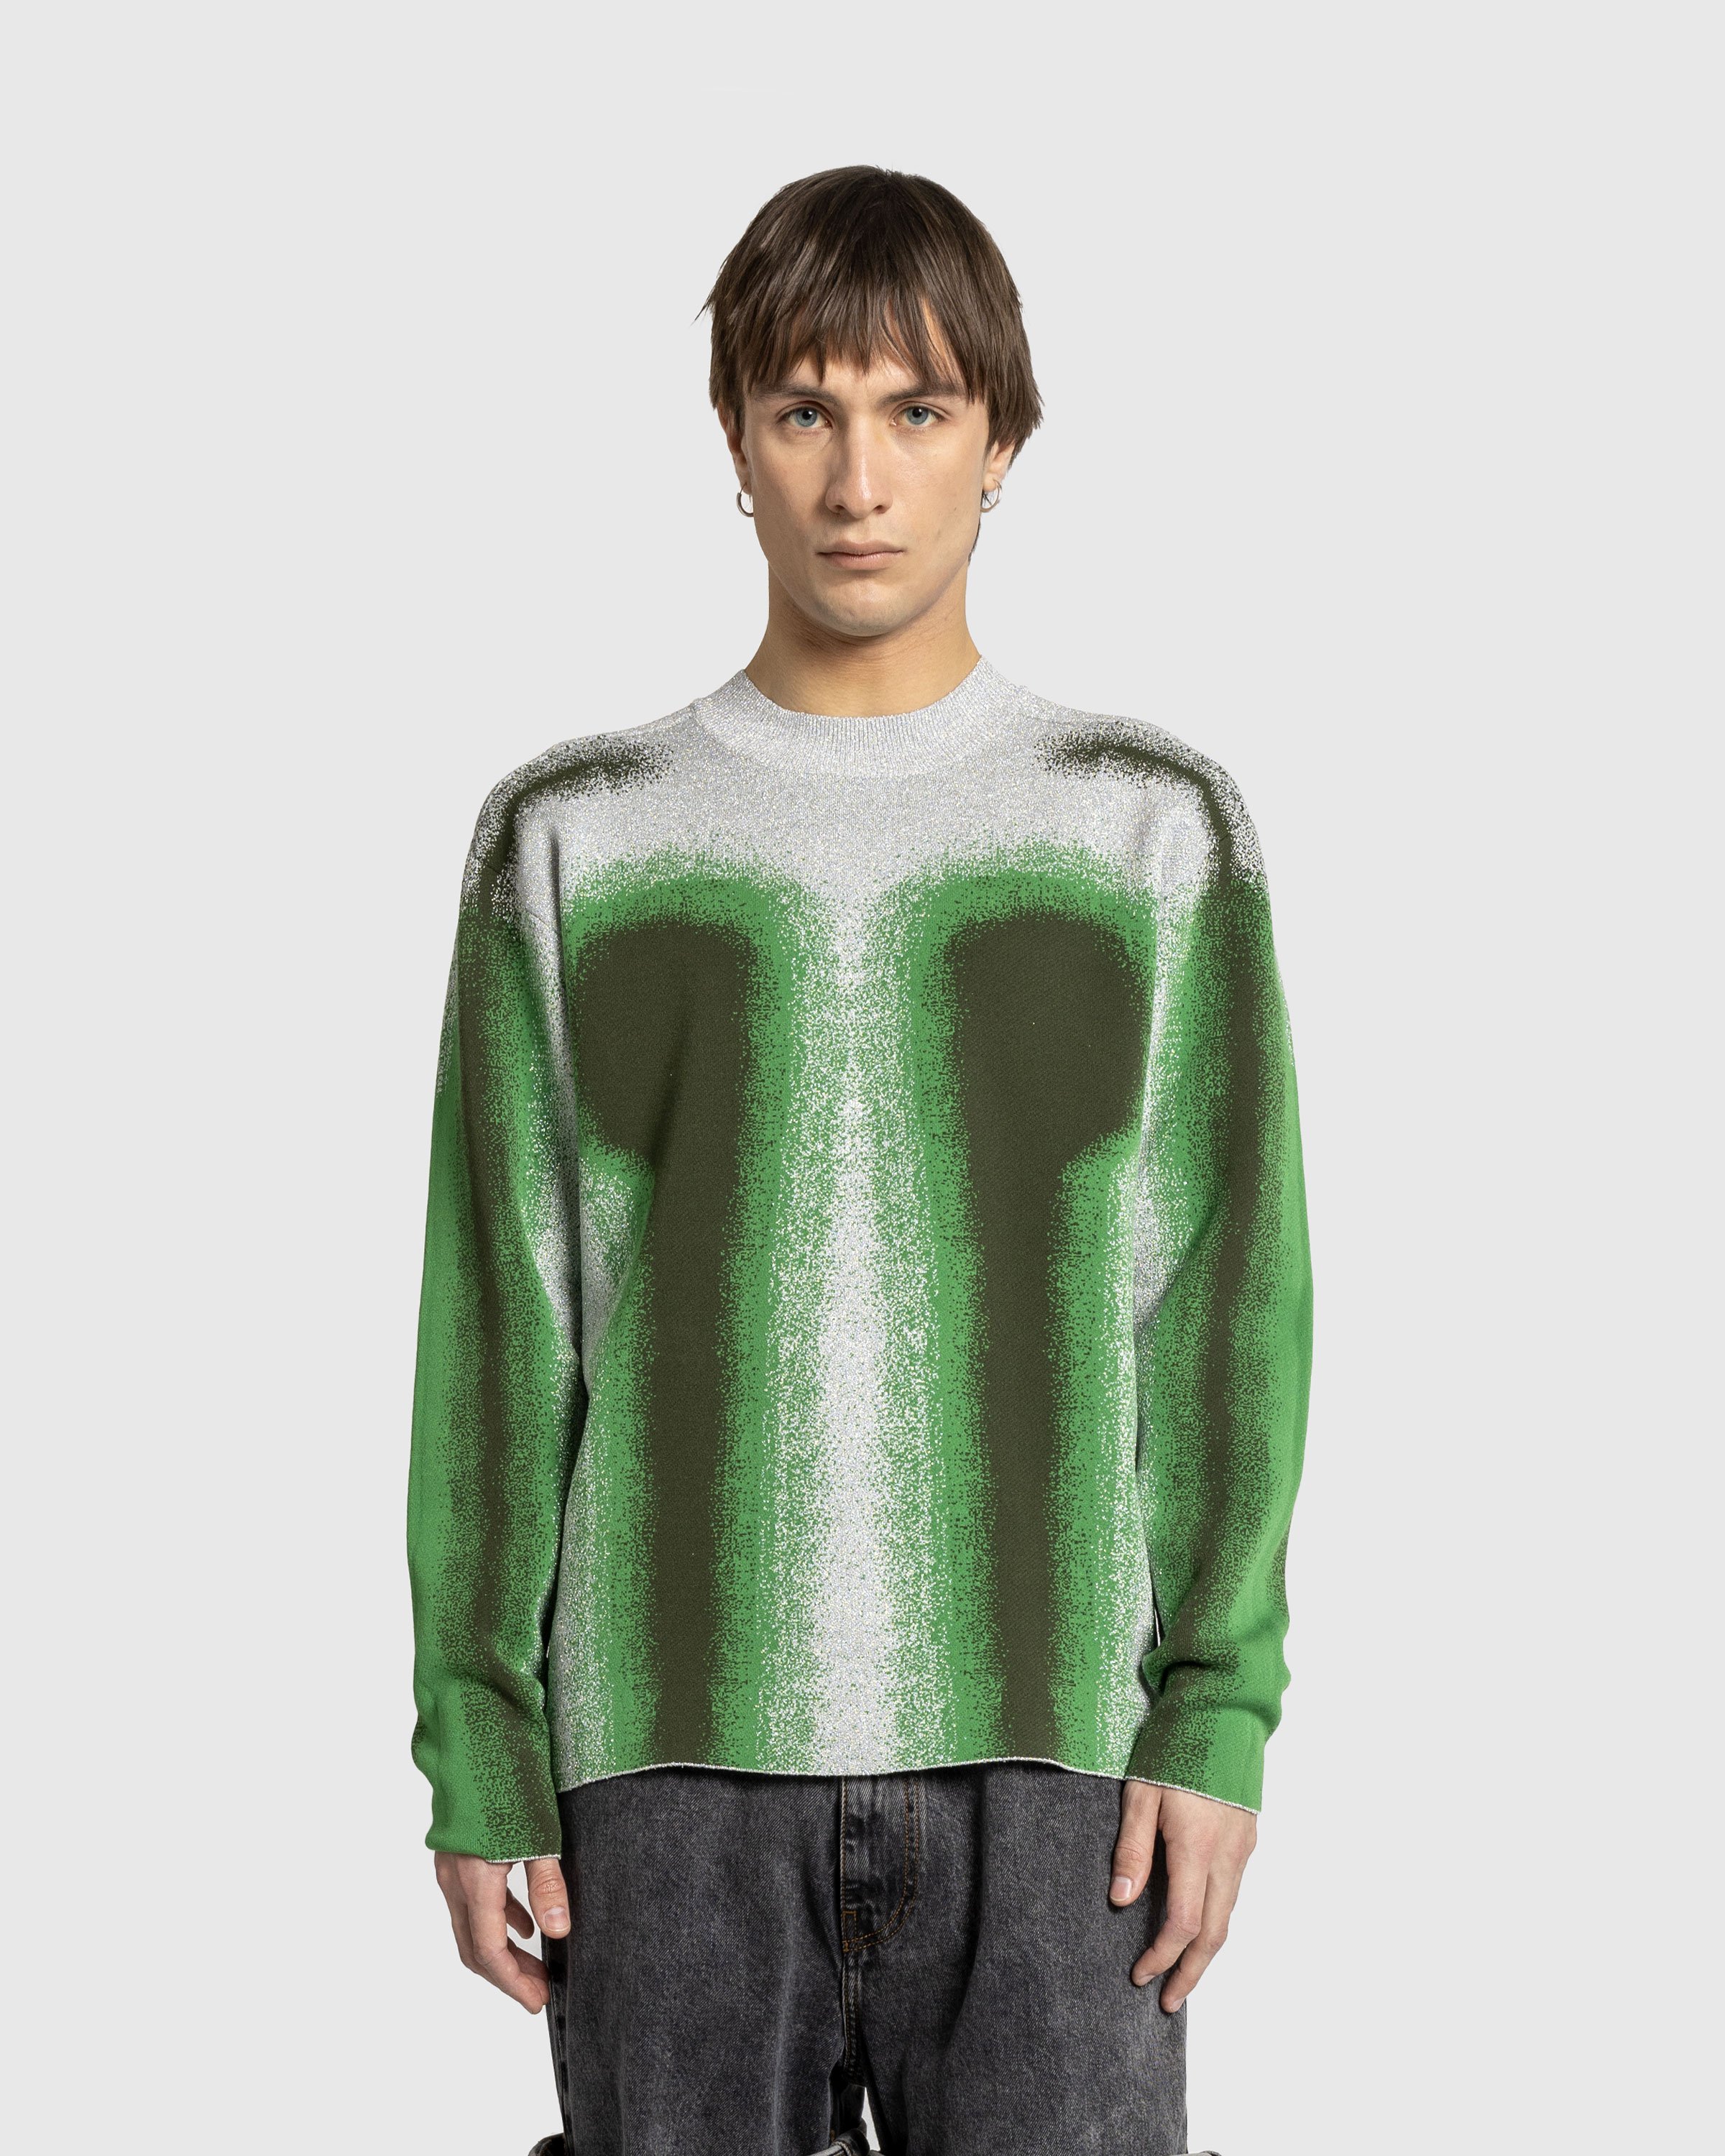 Y/Project - Gradient Knit Crew Neck Sweater Green - Clothing - Green - Image 2